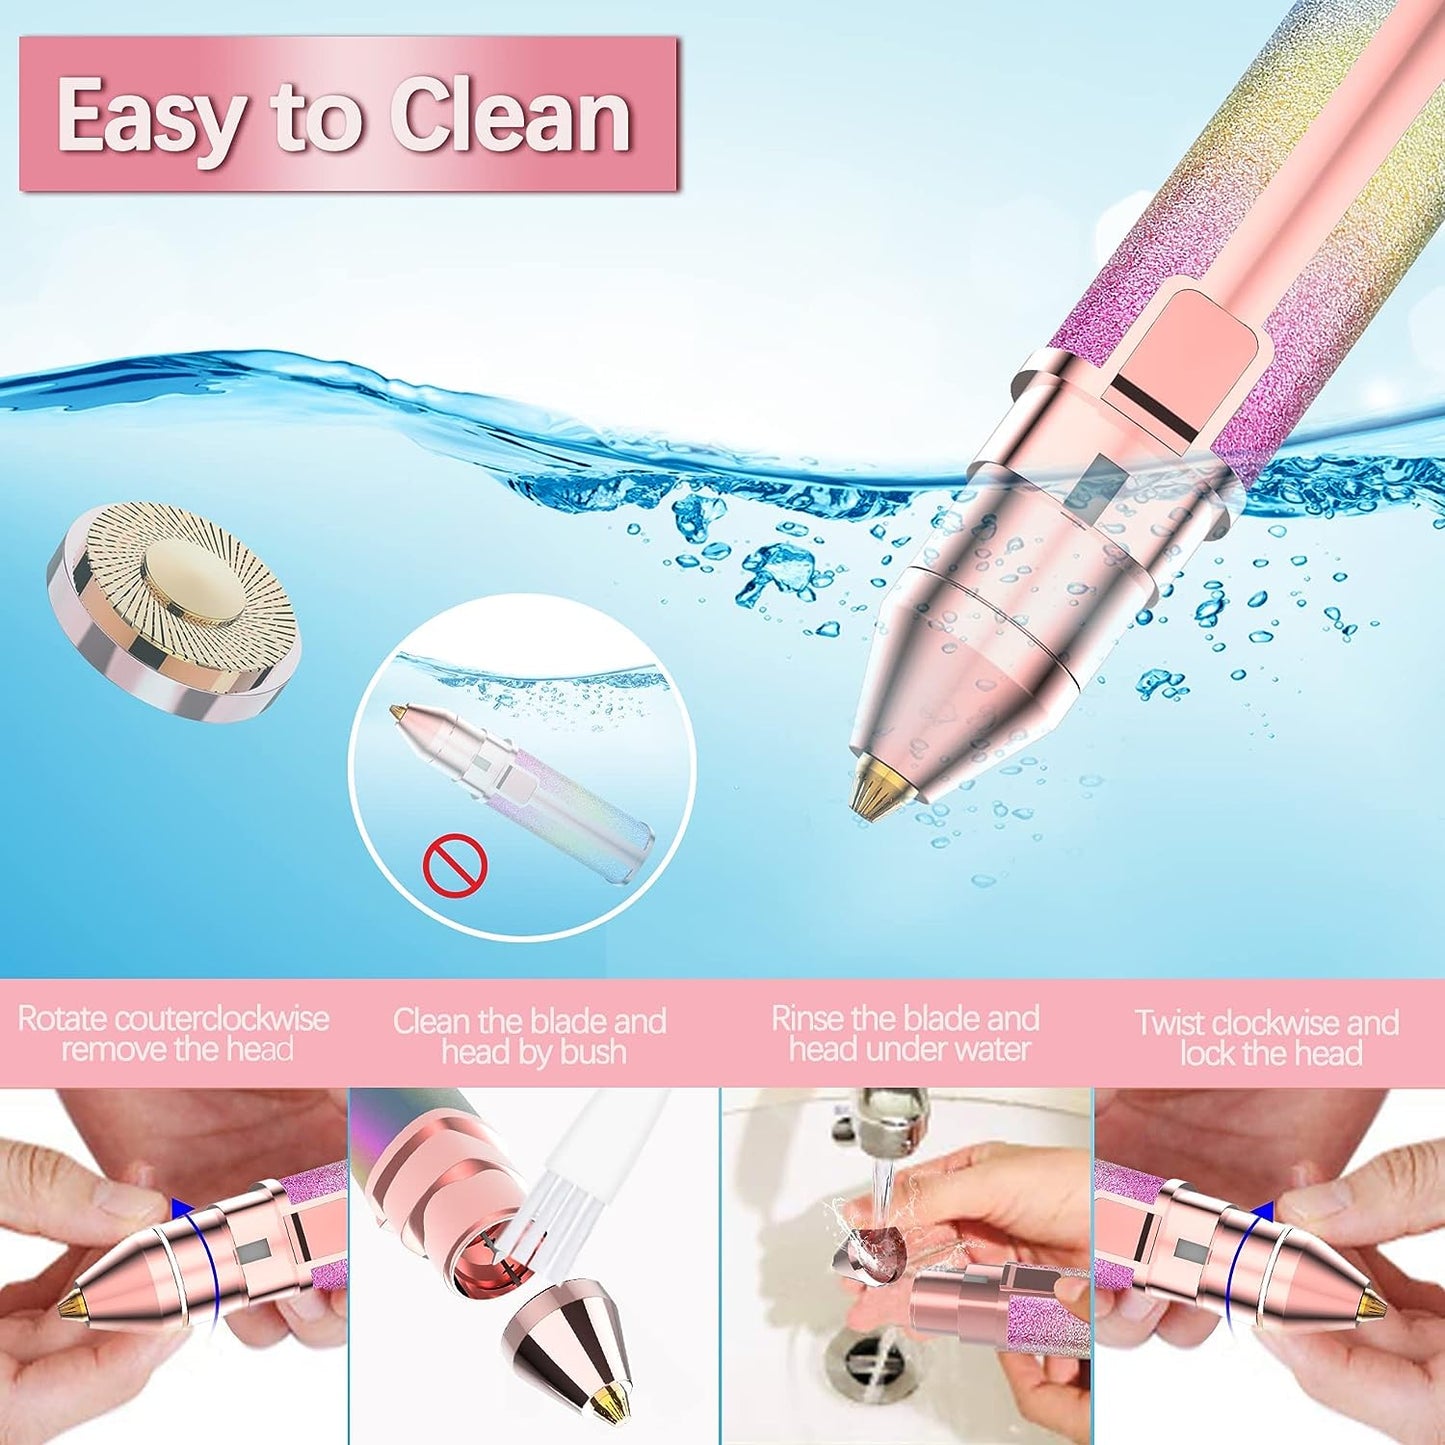 2 in 1 Eye Brow Trimmer and Facial Hair Remover + 500 Rupees Free Gift Card